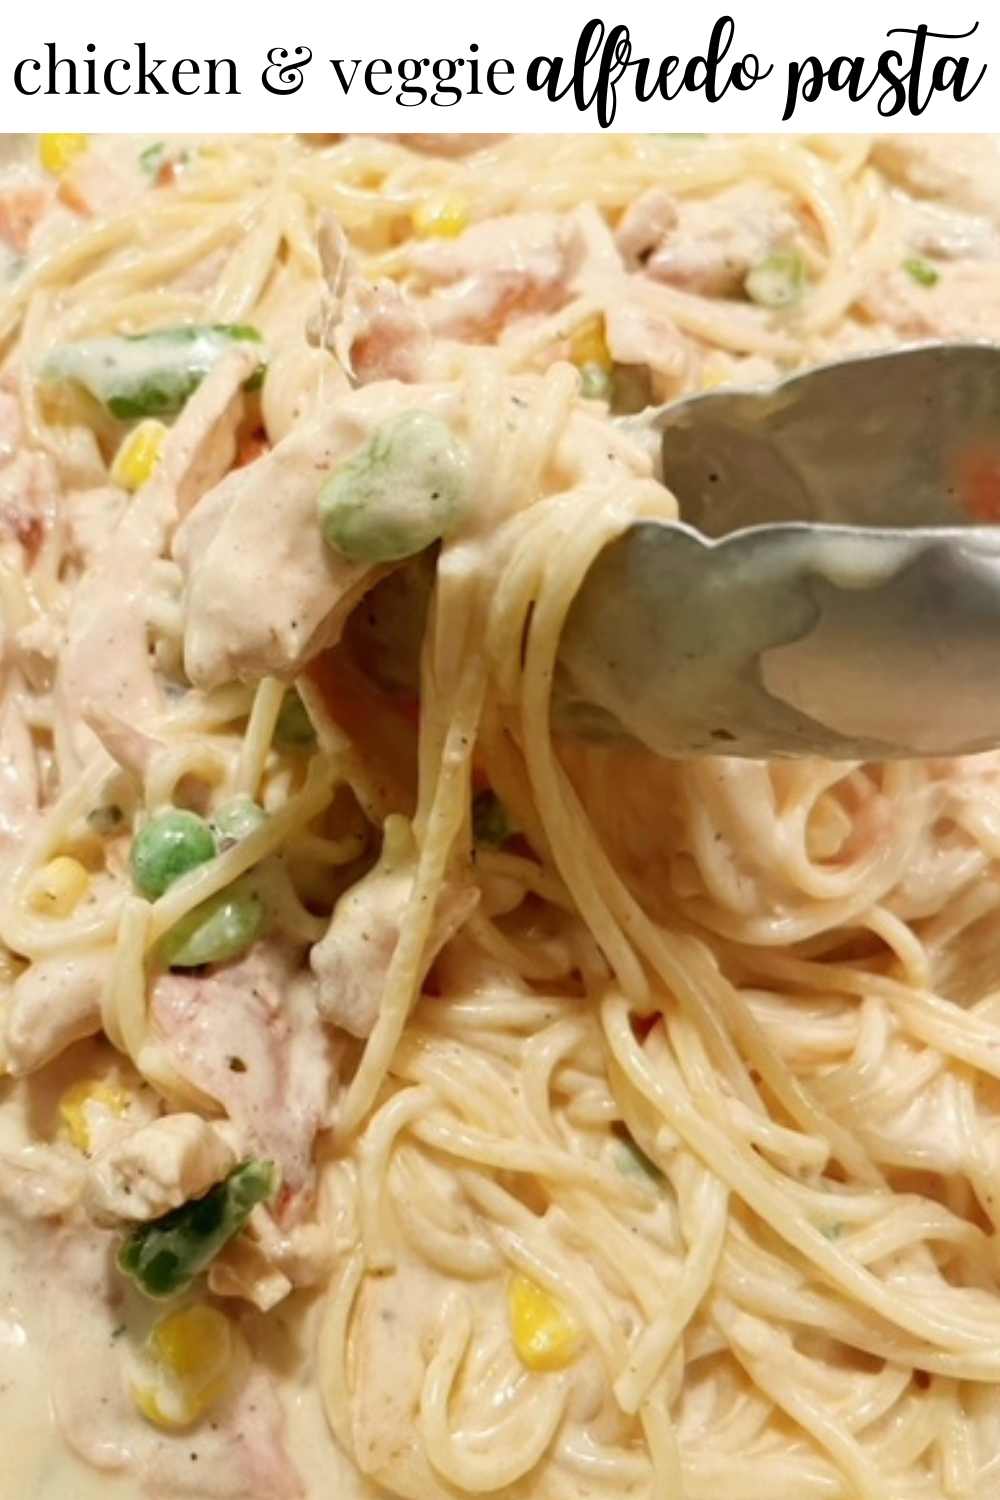 This alfredo pasta will be loved by your whole family! By using frozen veggies and rotisserie chicken, you'll have dinner ready so quickly.